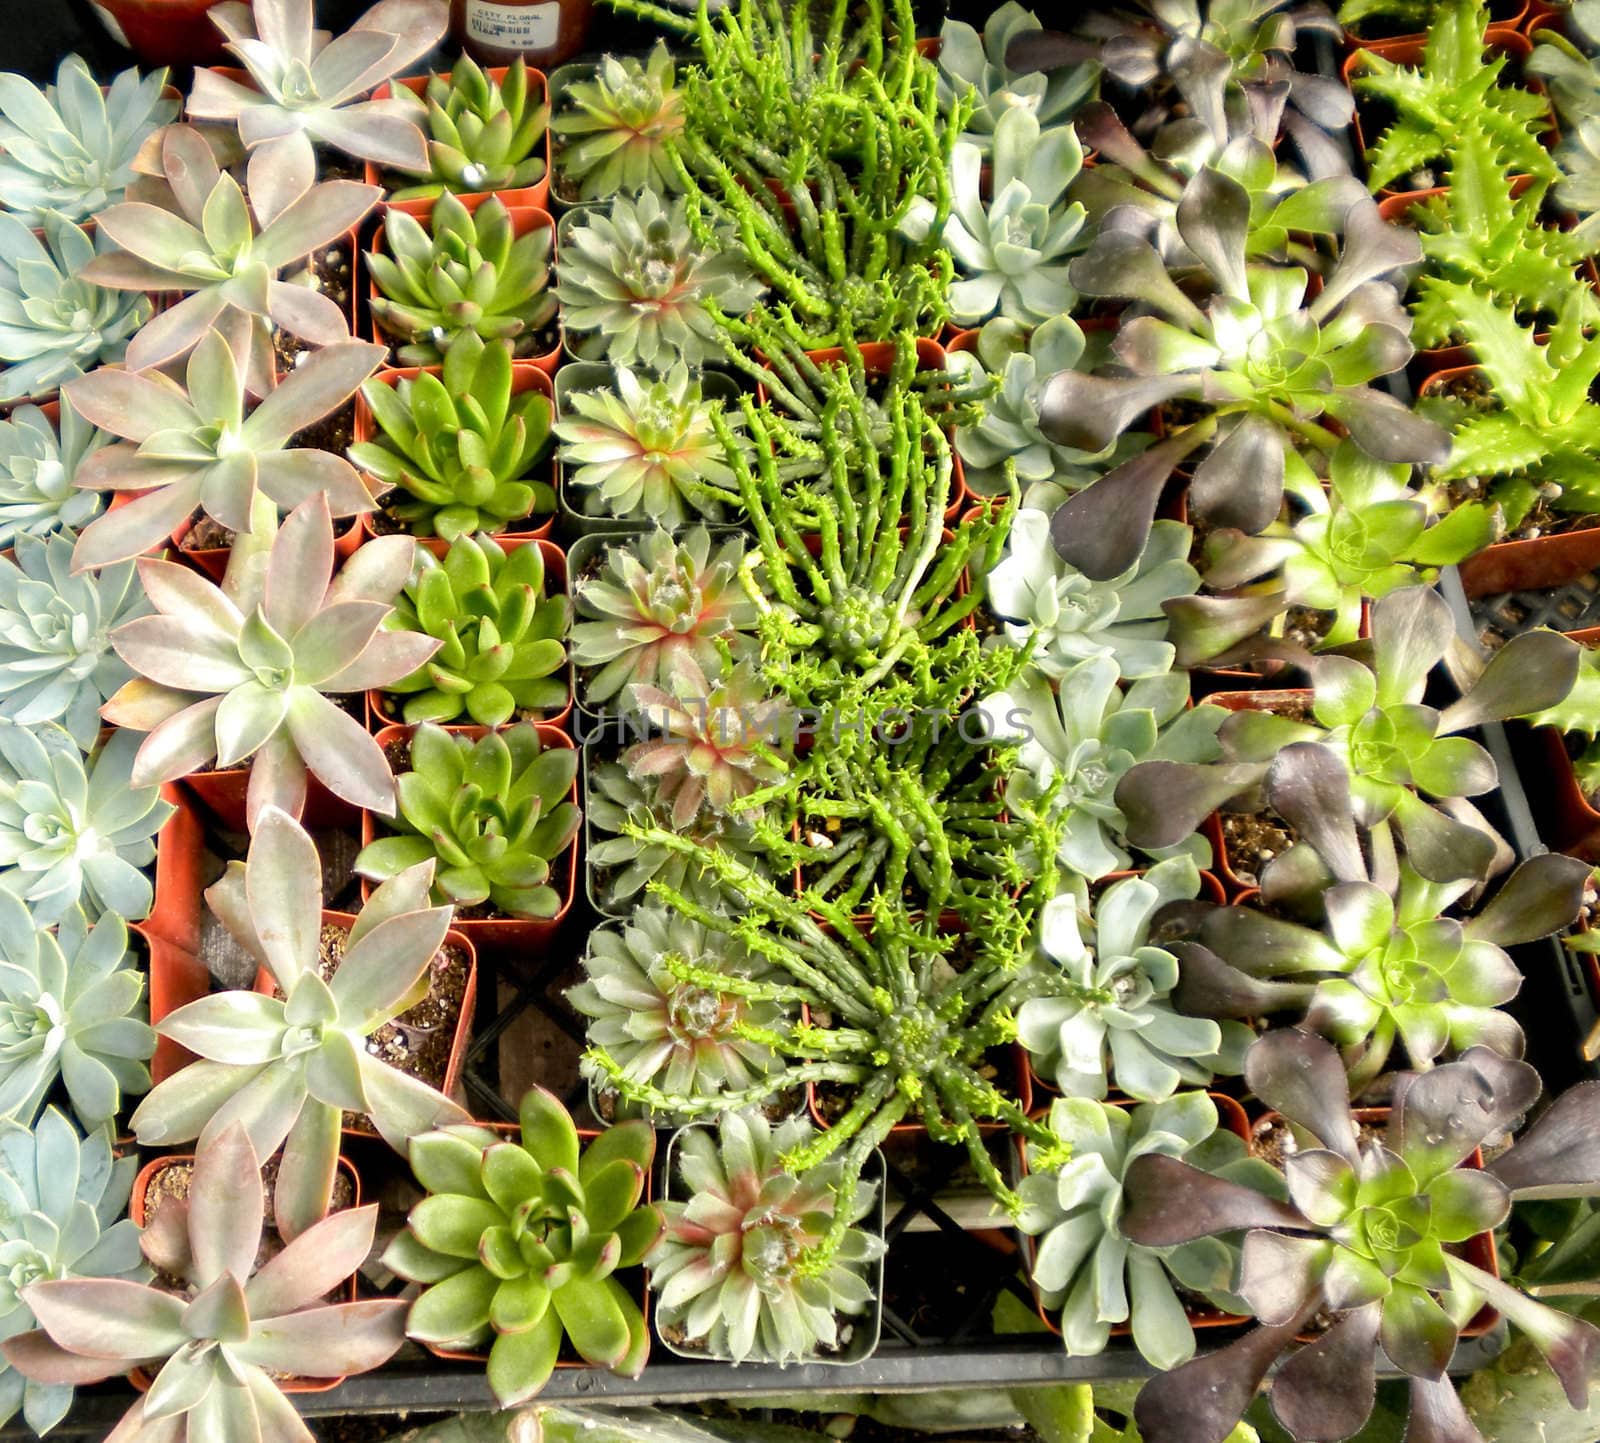 An assortment of succulent or cacti plants that grow in desert climates or that are used in xeriscaping.